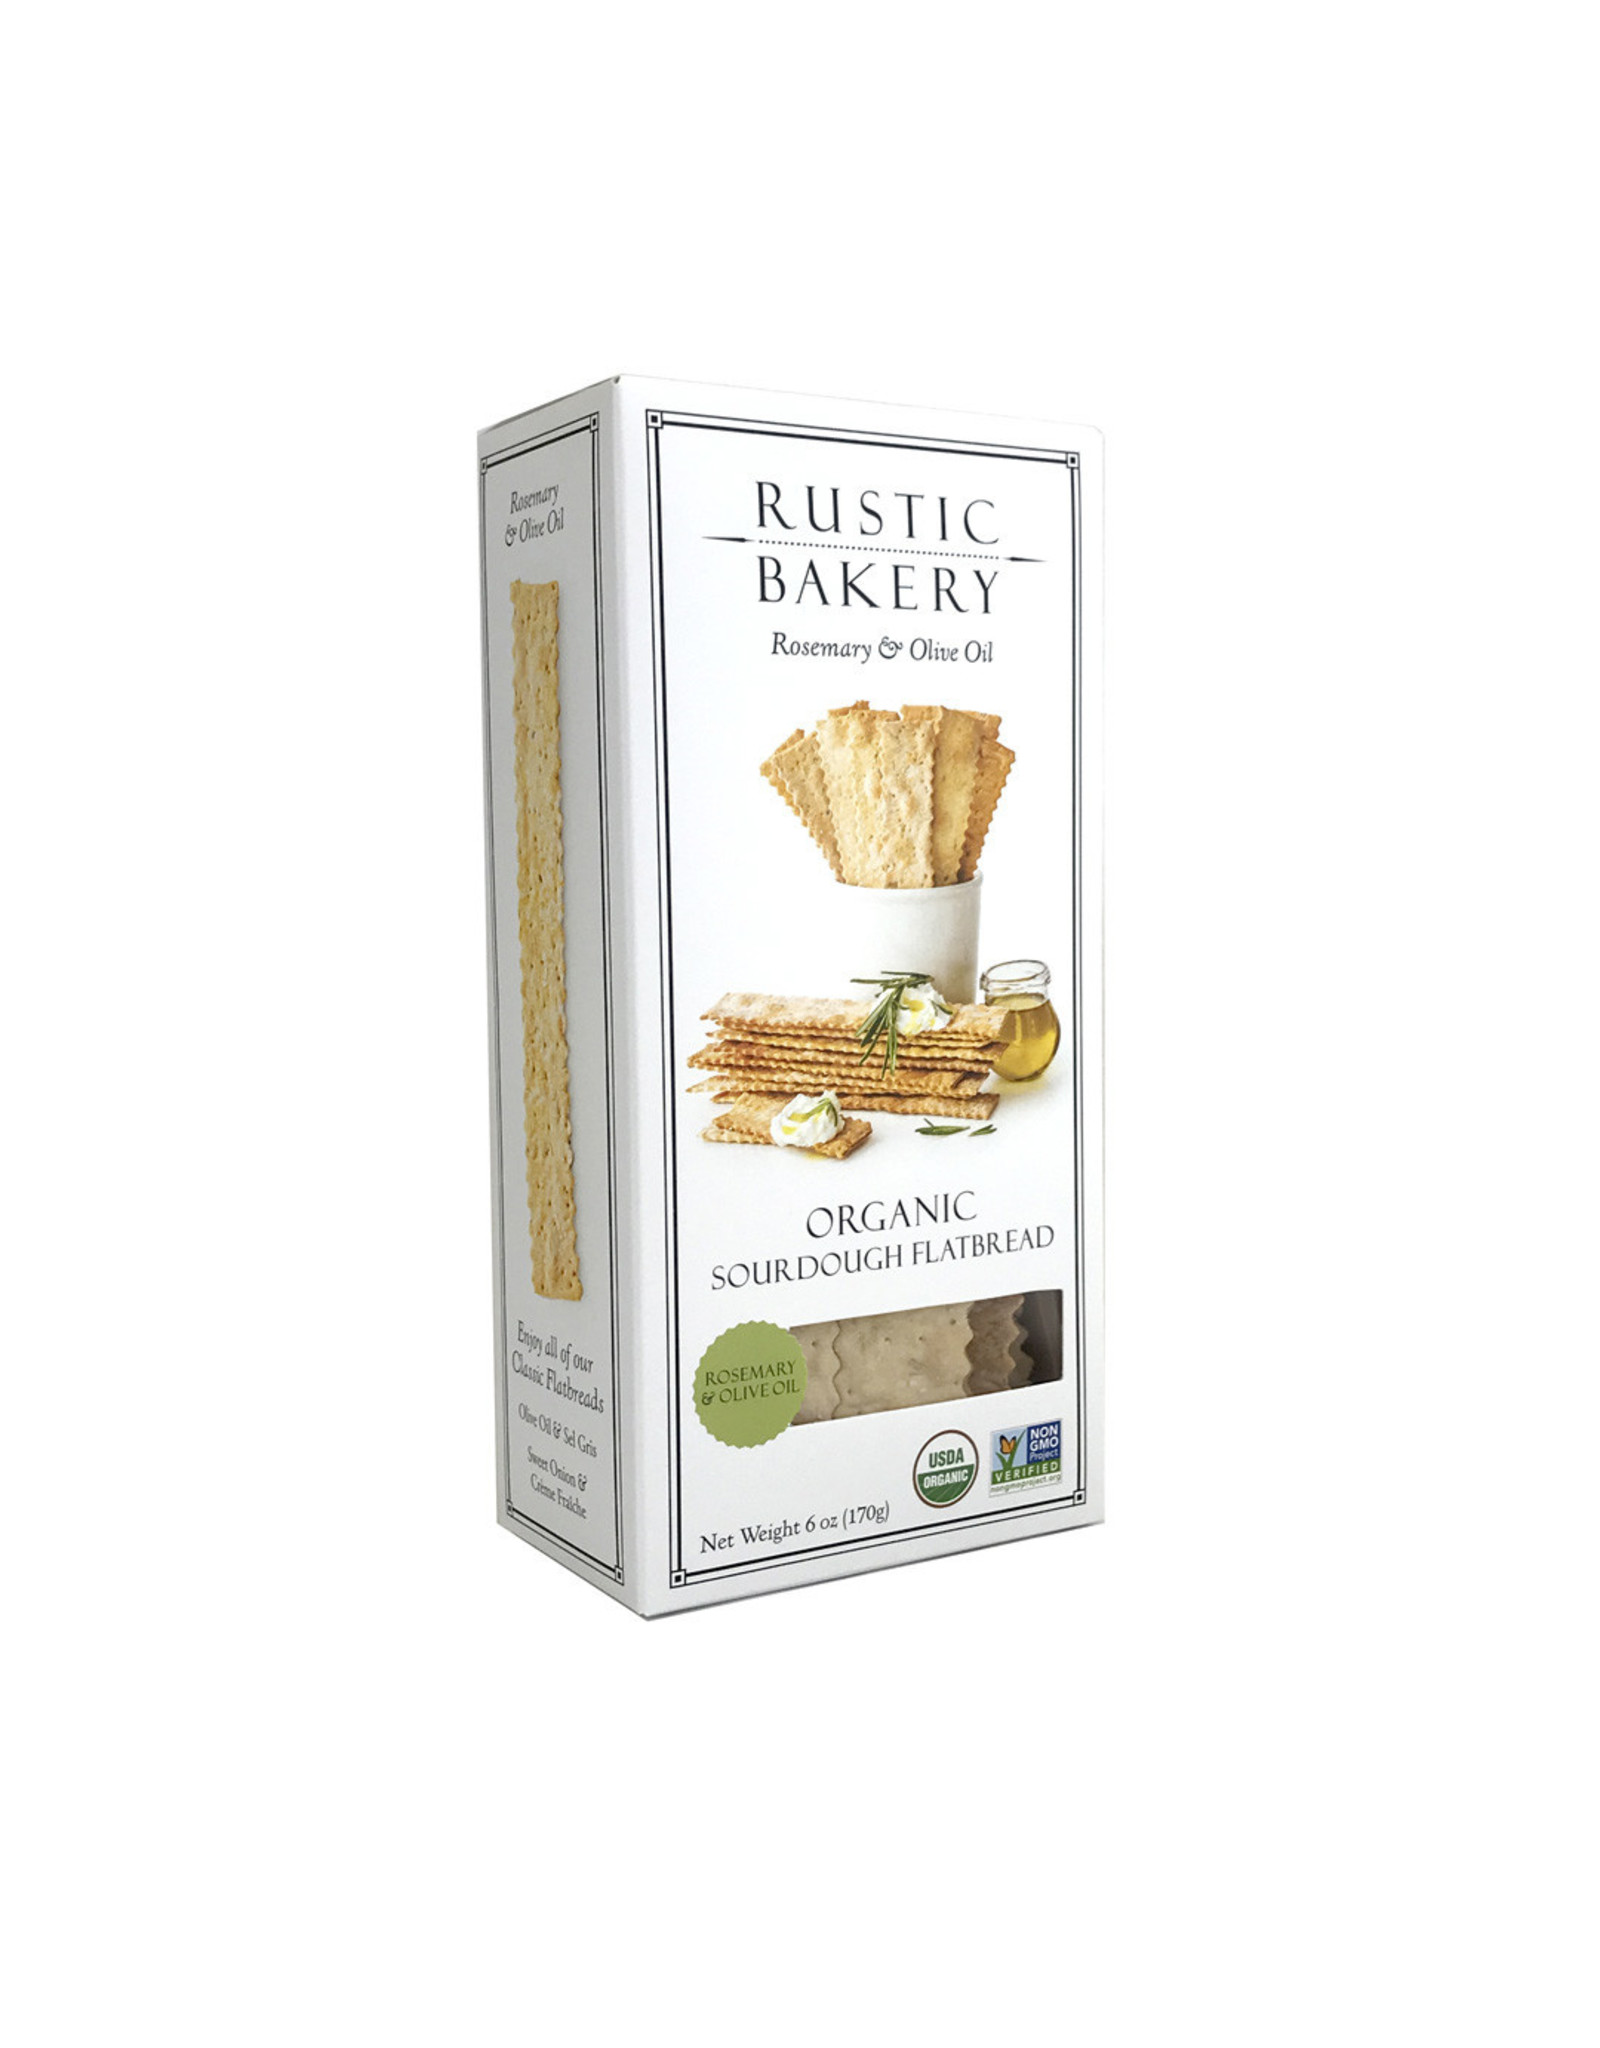 Rustic Bakery Rosemary & Olive Oil Crackers - Bacchus Wine & Spirits Shop